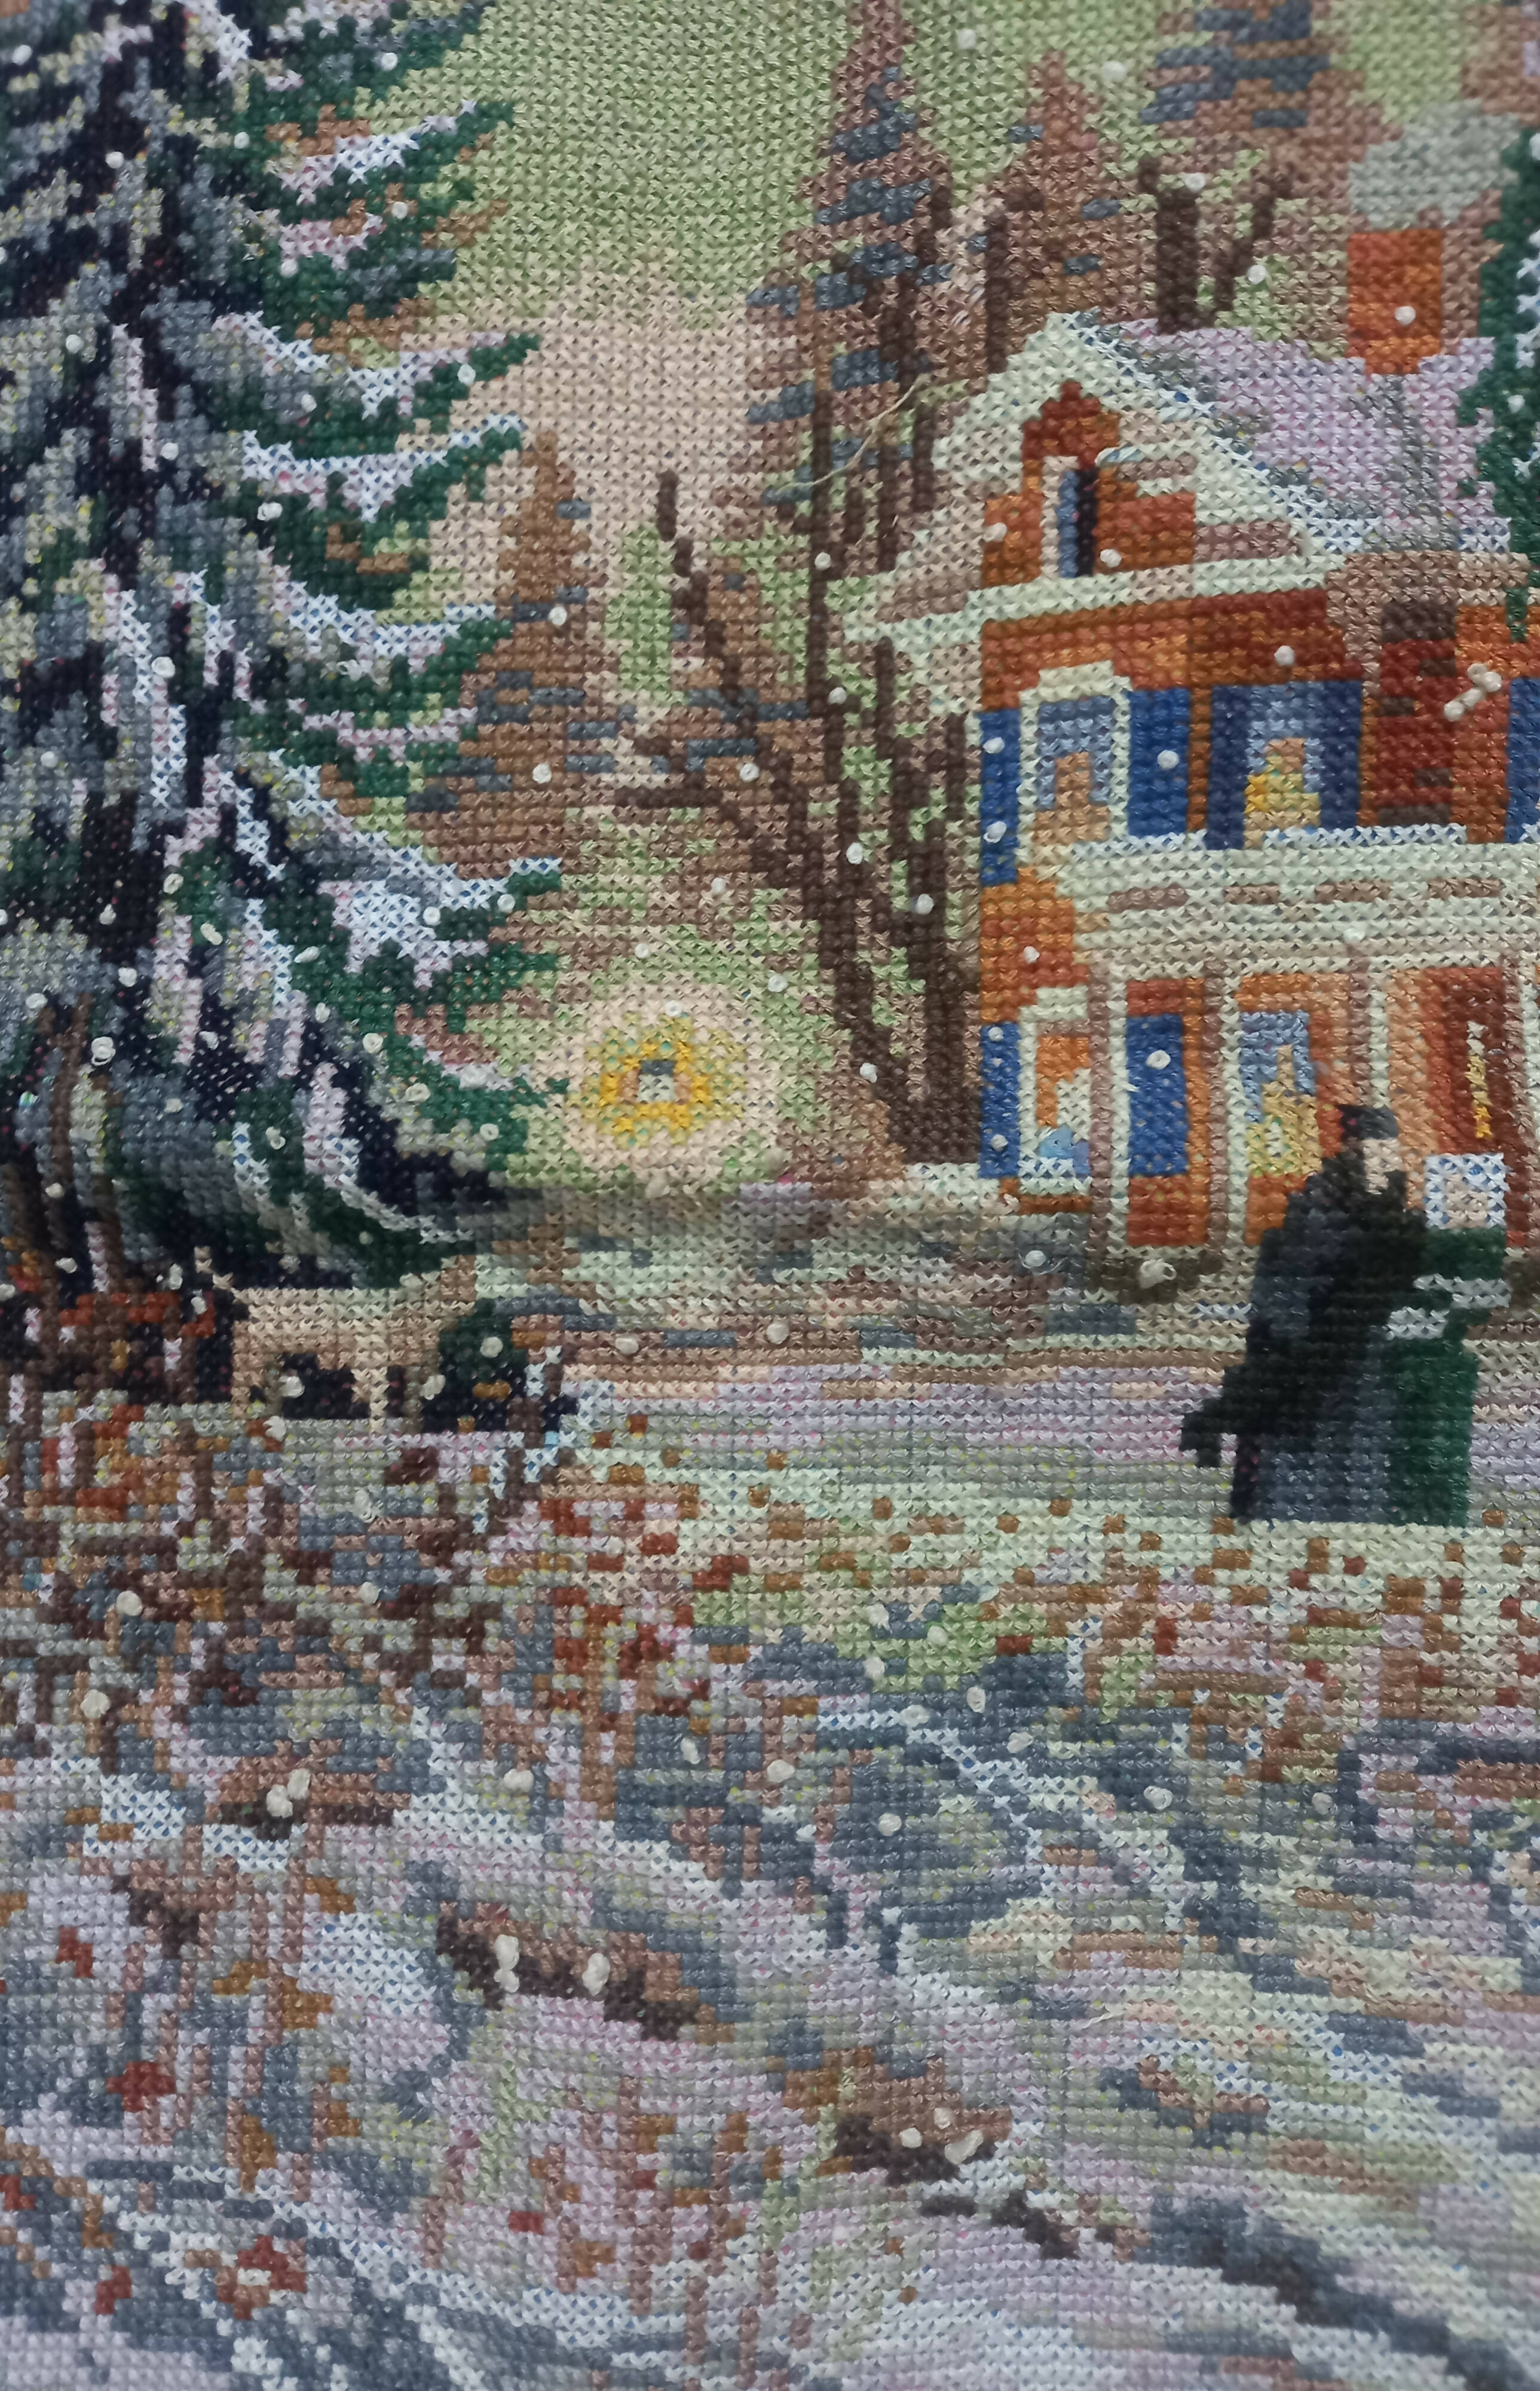 Full hand embroidered snowscape